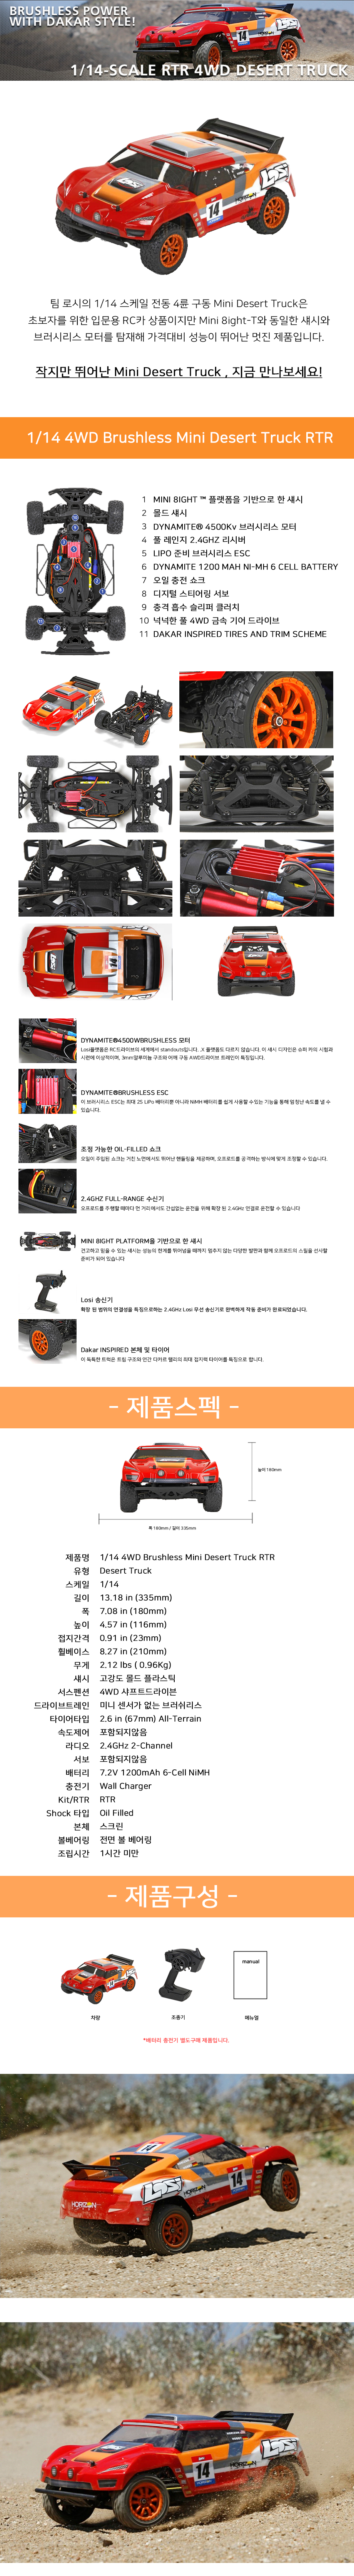 2699_114639_contents1.png